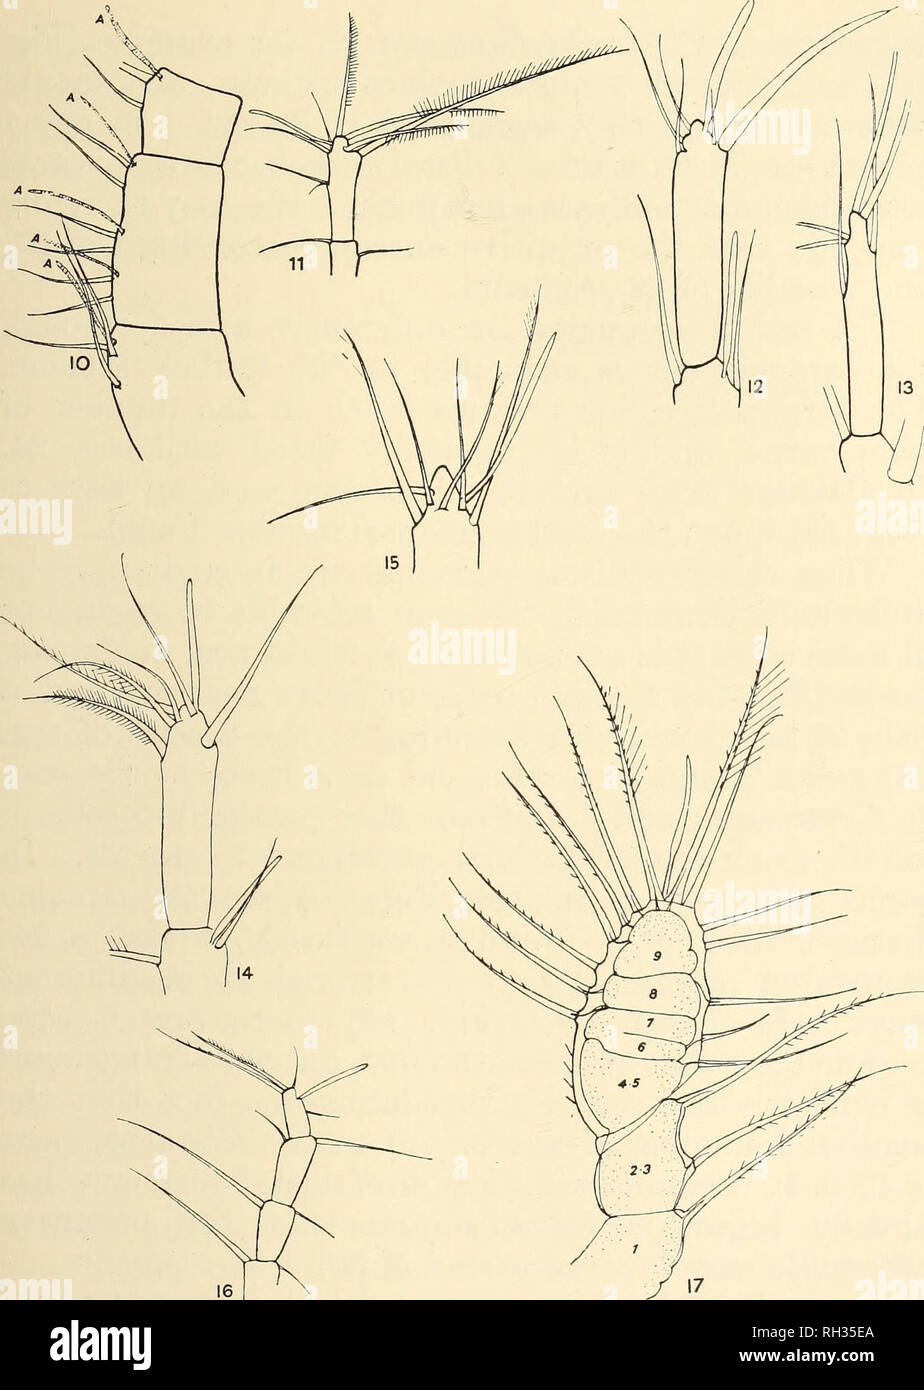 . British fresh-water Copepoda. --. Copepoda; Crustacea. ANTENNULE. 41. Figs. 10-17.—Antennule. (Figs. 11-16, terminal segments of certain Calanoida.) Fig. 10.—Segs. 1-3 of Calanus finmarchicus, showing grouping of setse and aesthetes in &quot; tritheks.&quot; Seg. 2 has three complete tritheks. Fig. 11.—Parapontella hrevicornis. Fig. 12.—Temora longicornis. Fig. 13.—Calanus finmarchicus. Fig. 14.—Anomalocera pattersoni. Fig. 15.—Eurytemora velox. Fig. 16.—Stephos sp. Fig. 17.—Antennule of E. velox. Last nauplius, about to moult.. Please note that these images are extracted from scanned page i Stock Photo